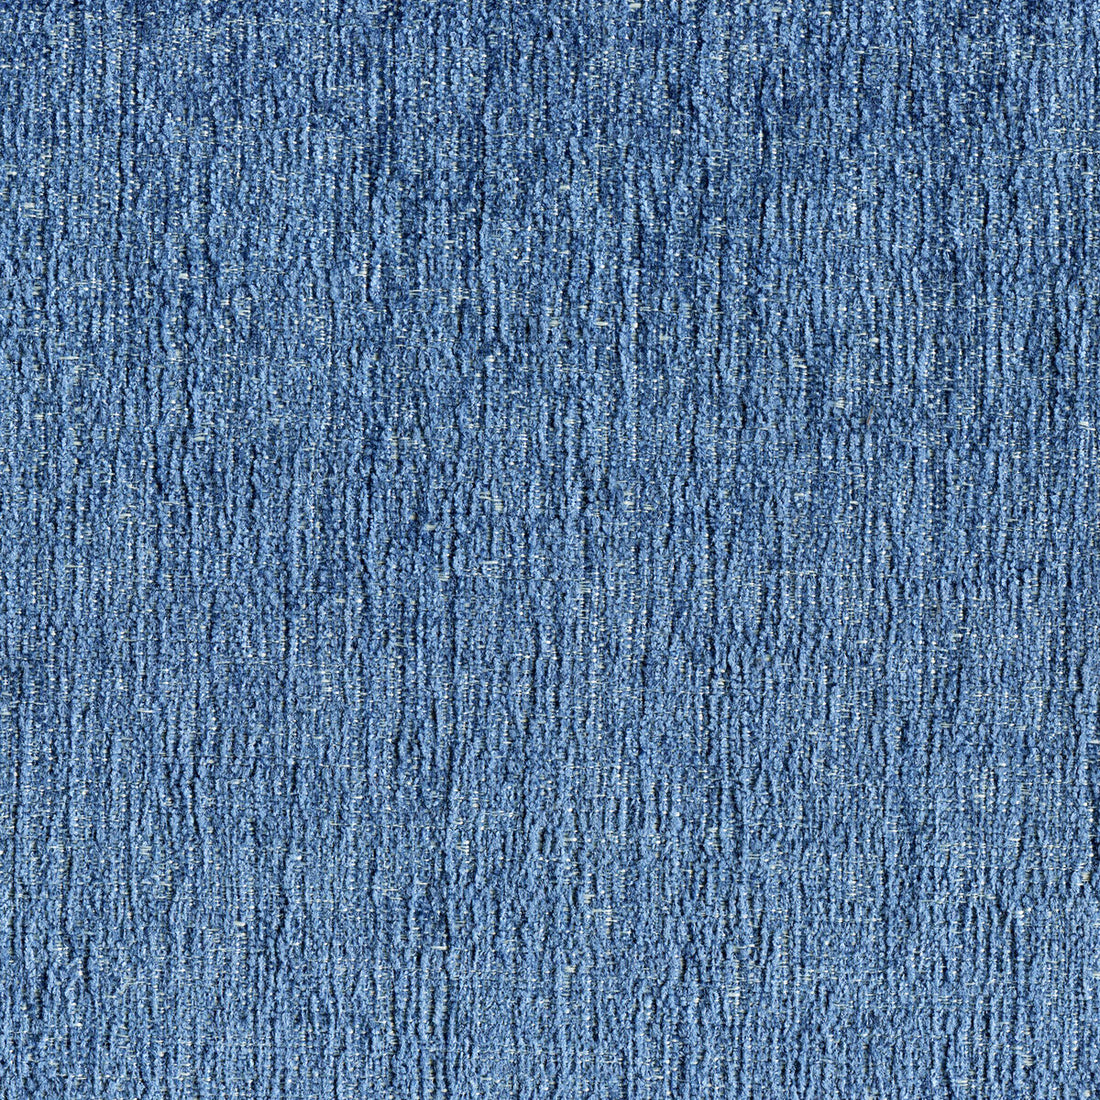 Kravet Smart fabric in 34622-5 color - pattern 34622.5.0 - by Kravet Smart in the Performance Crypton Home collection